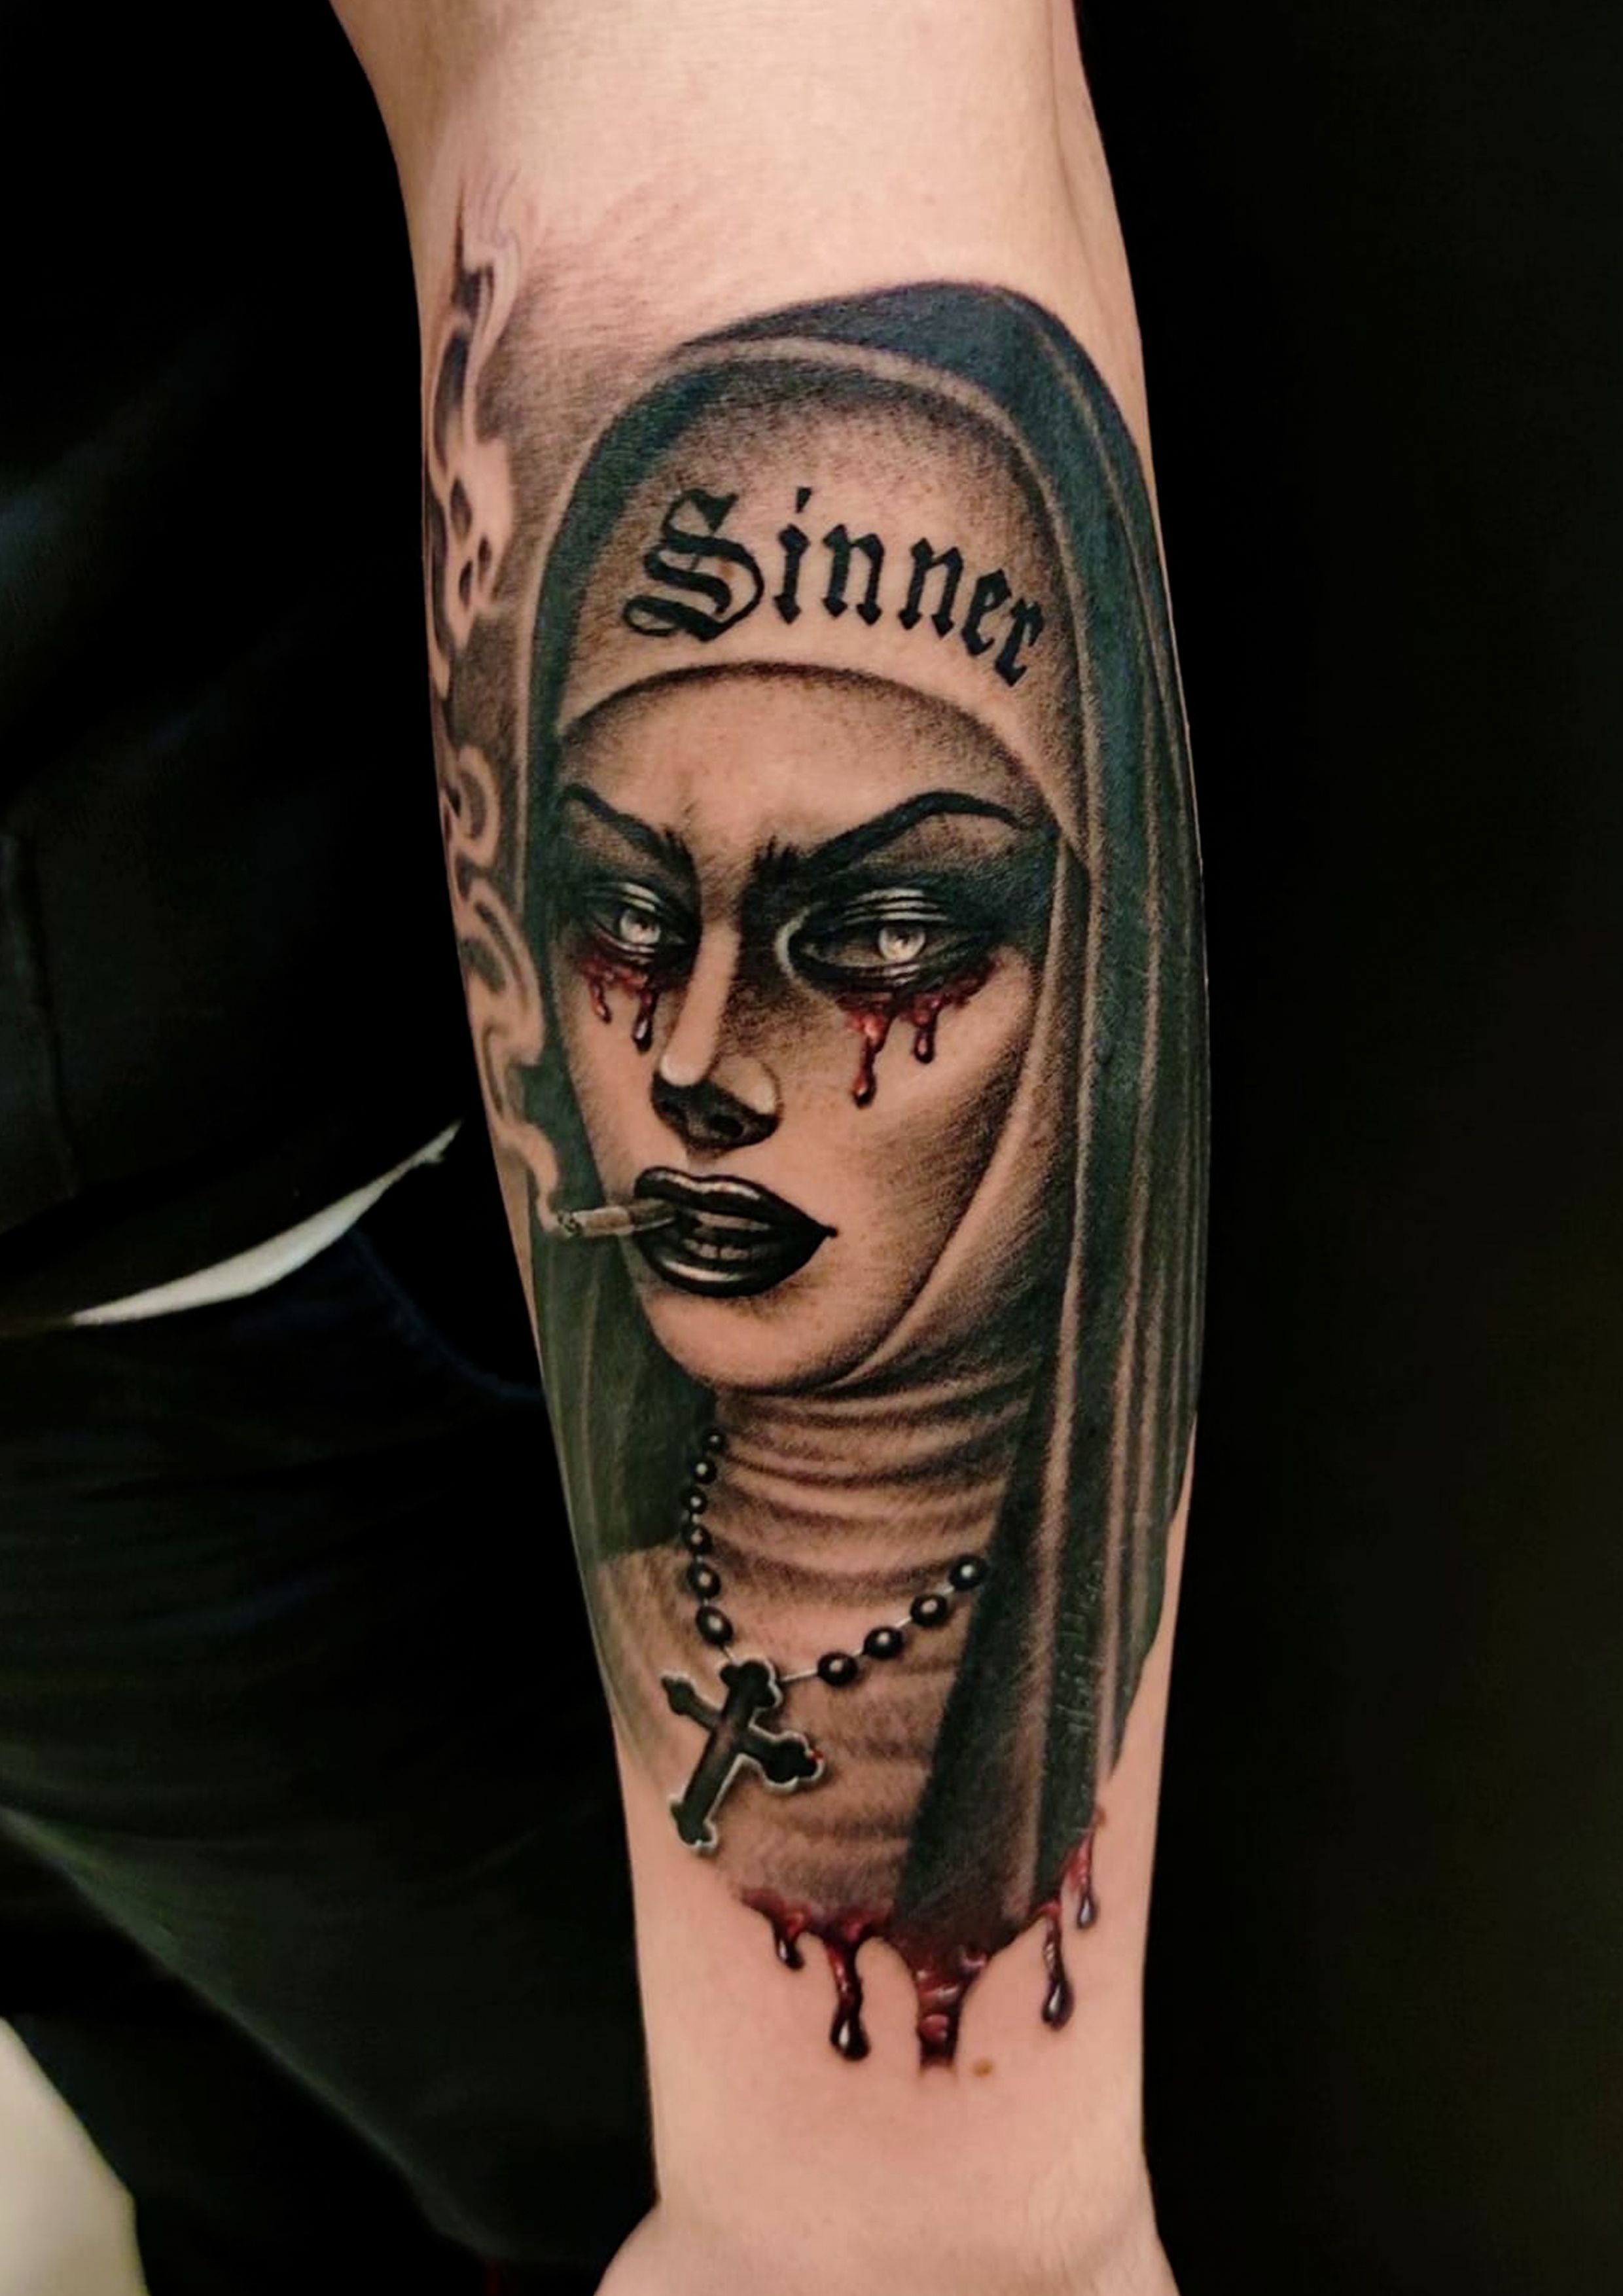 The Sinner and the Saint by Imme Böhme, Andreas Coenen, Ralf Ostermoller |  Tattoo Life eBooks